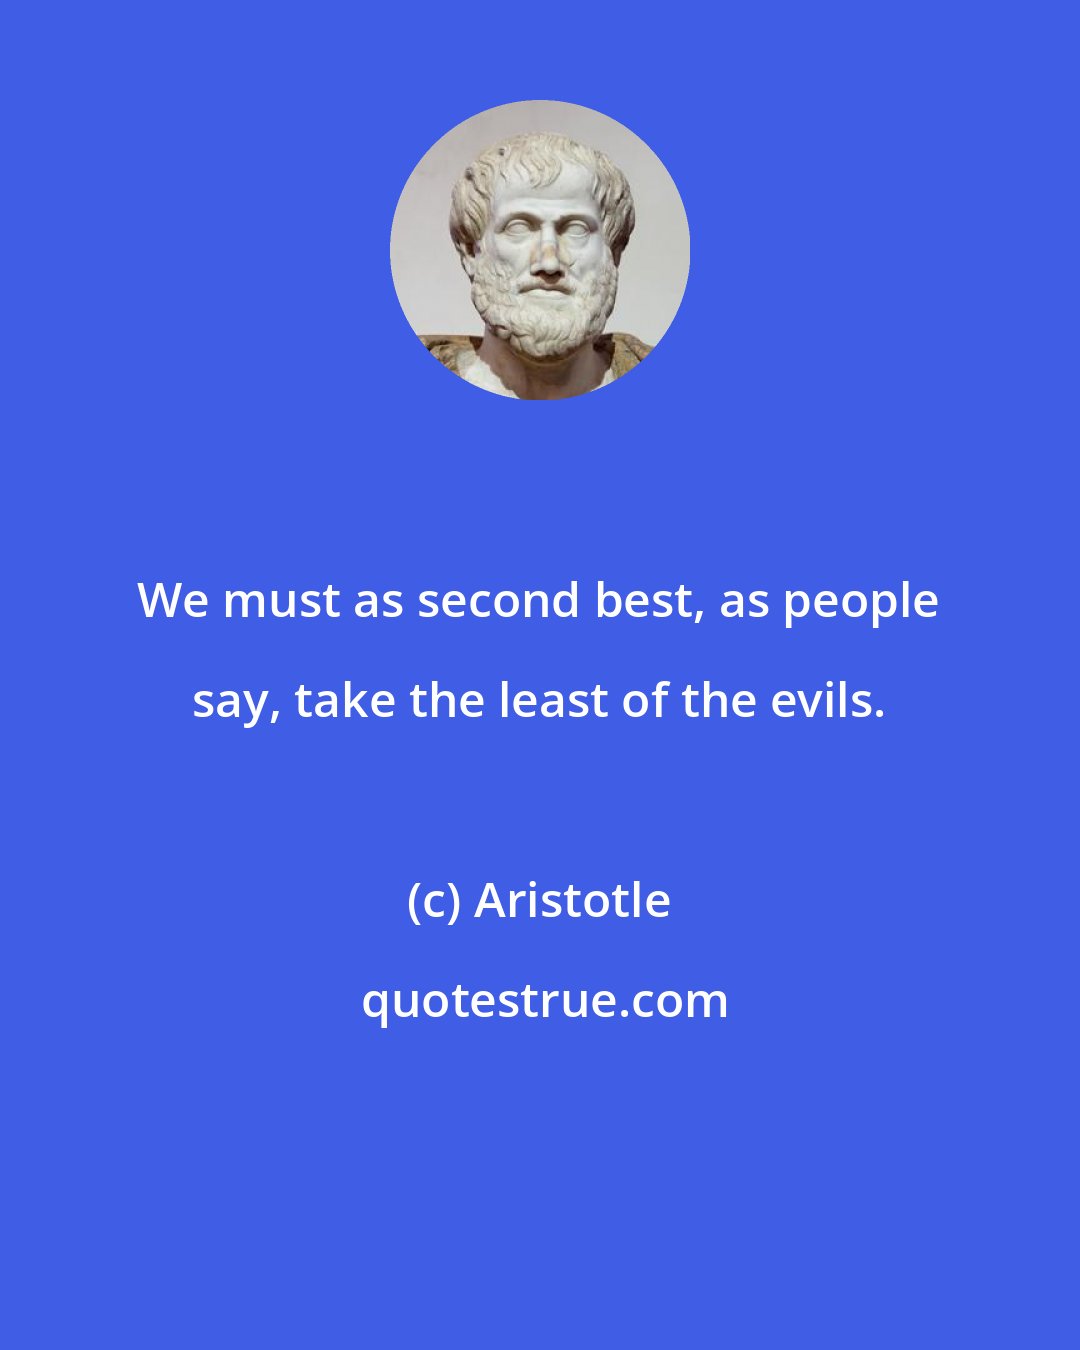 Aristotle: We must as second best, as people say, take the least of the evils.